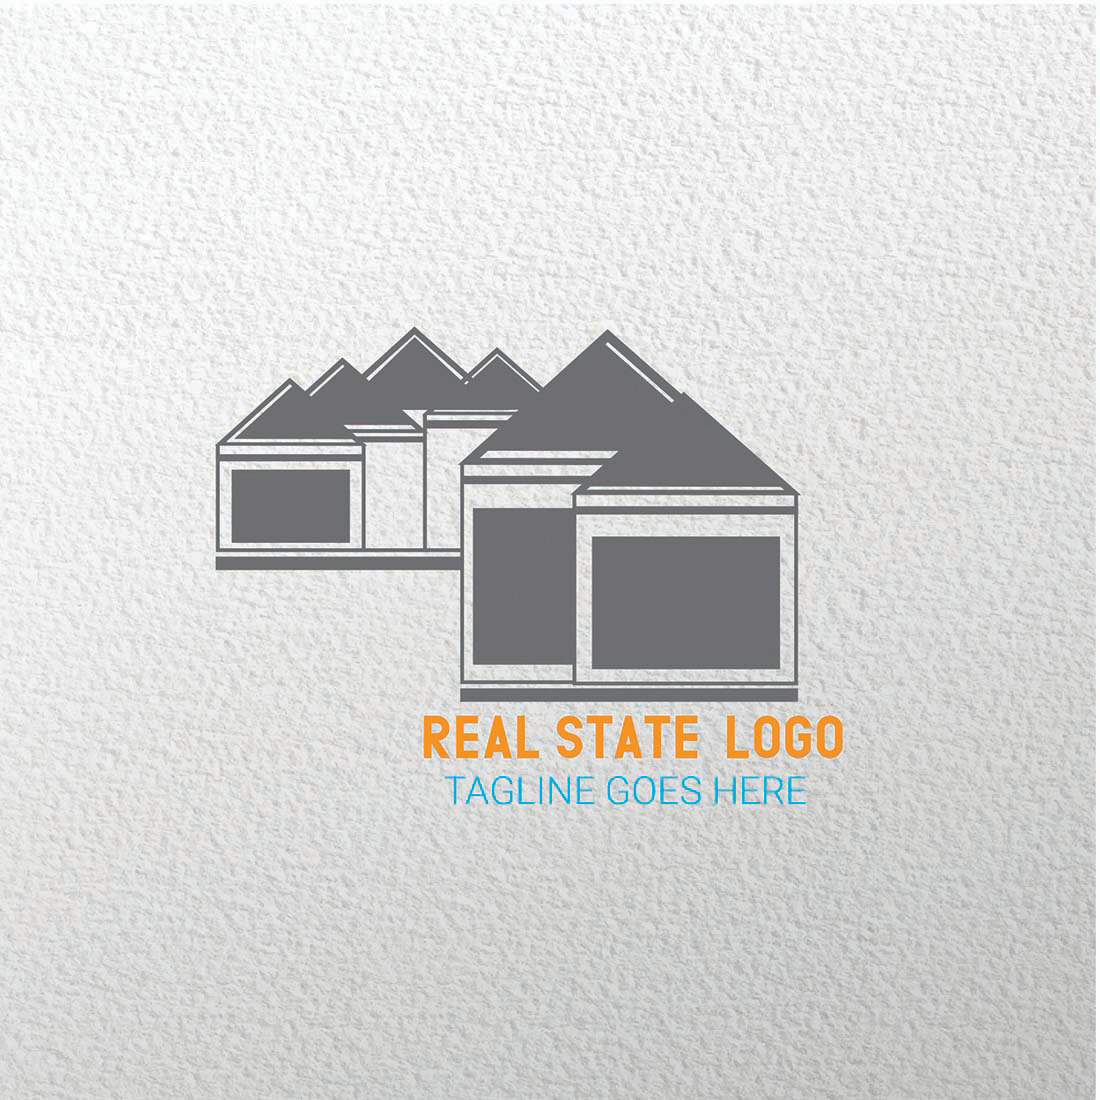 Three Real state logos cover image.